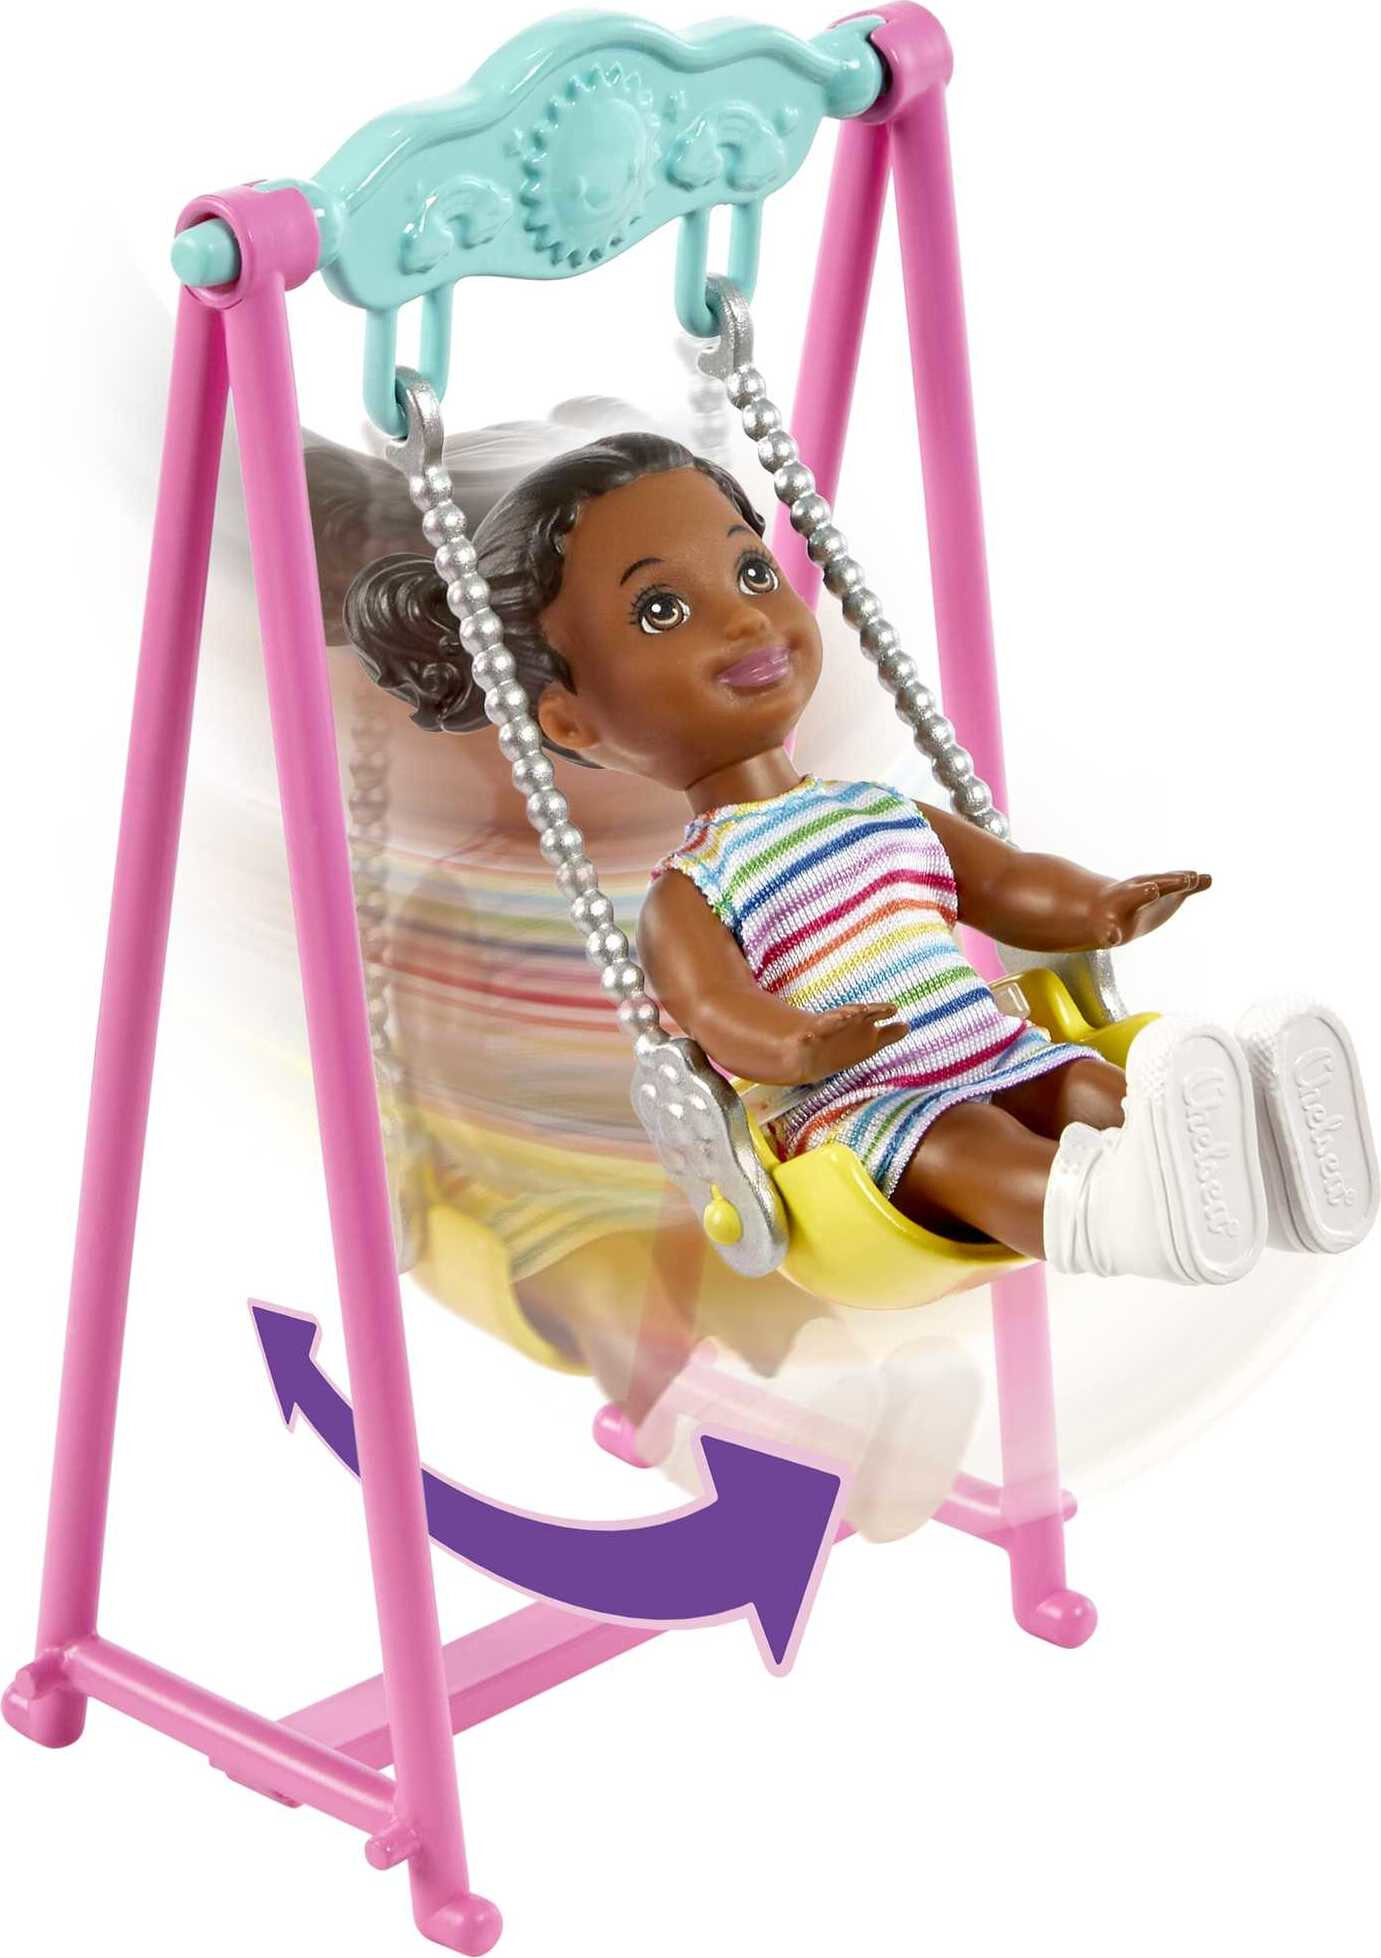 Barbie Skipper Babysitters Inc Bounce House Playset, Skipper Doll, Toddler Small Doll & Accessories - image 6 of 7